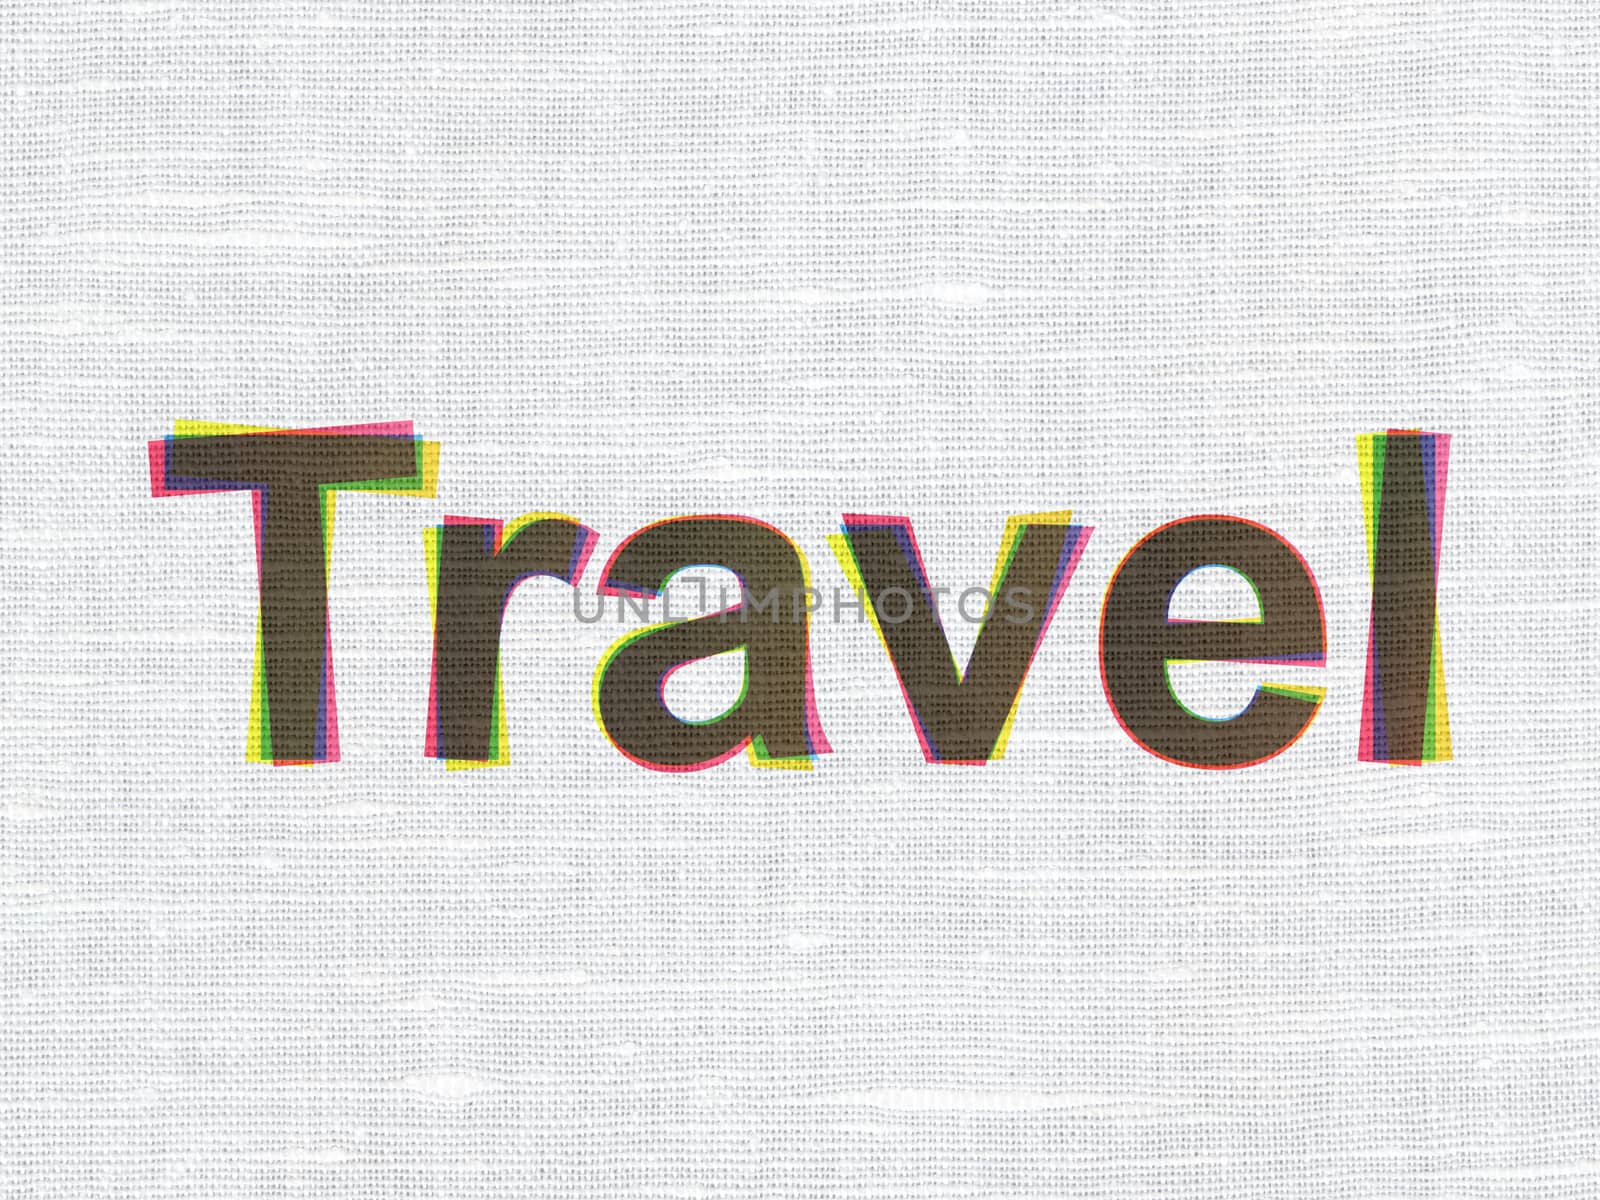 Holiday concept: CMYK Travel on linen fabric texture background